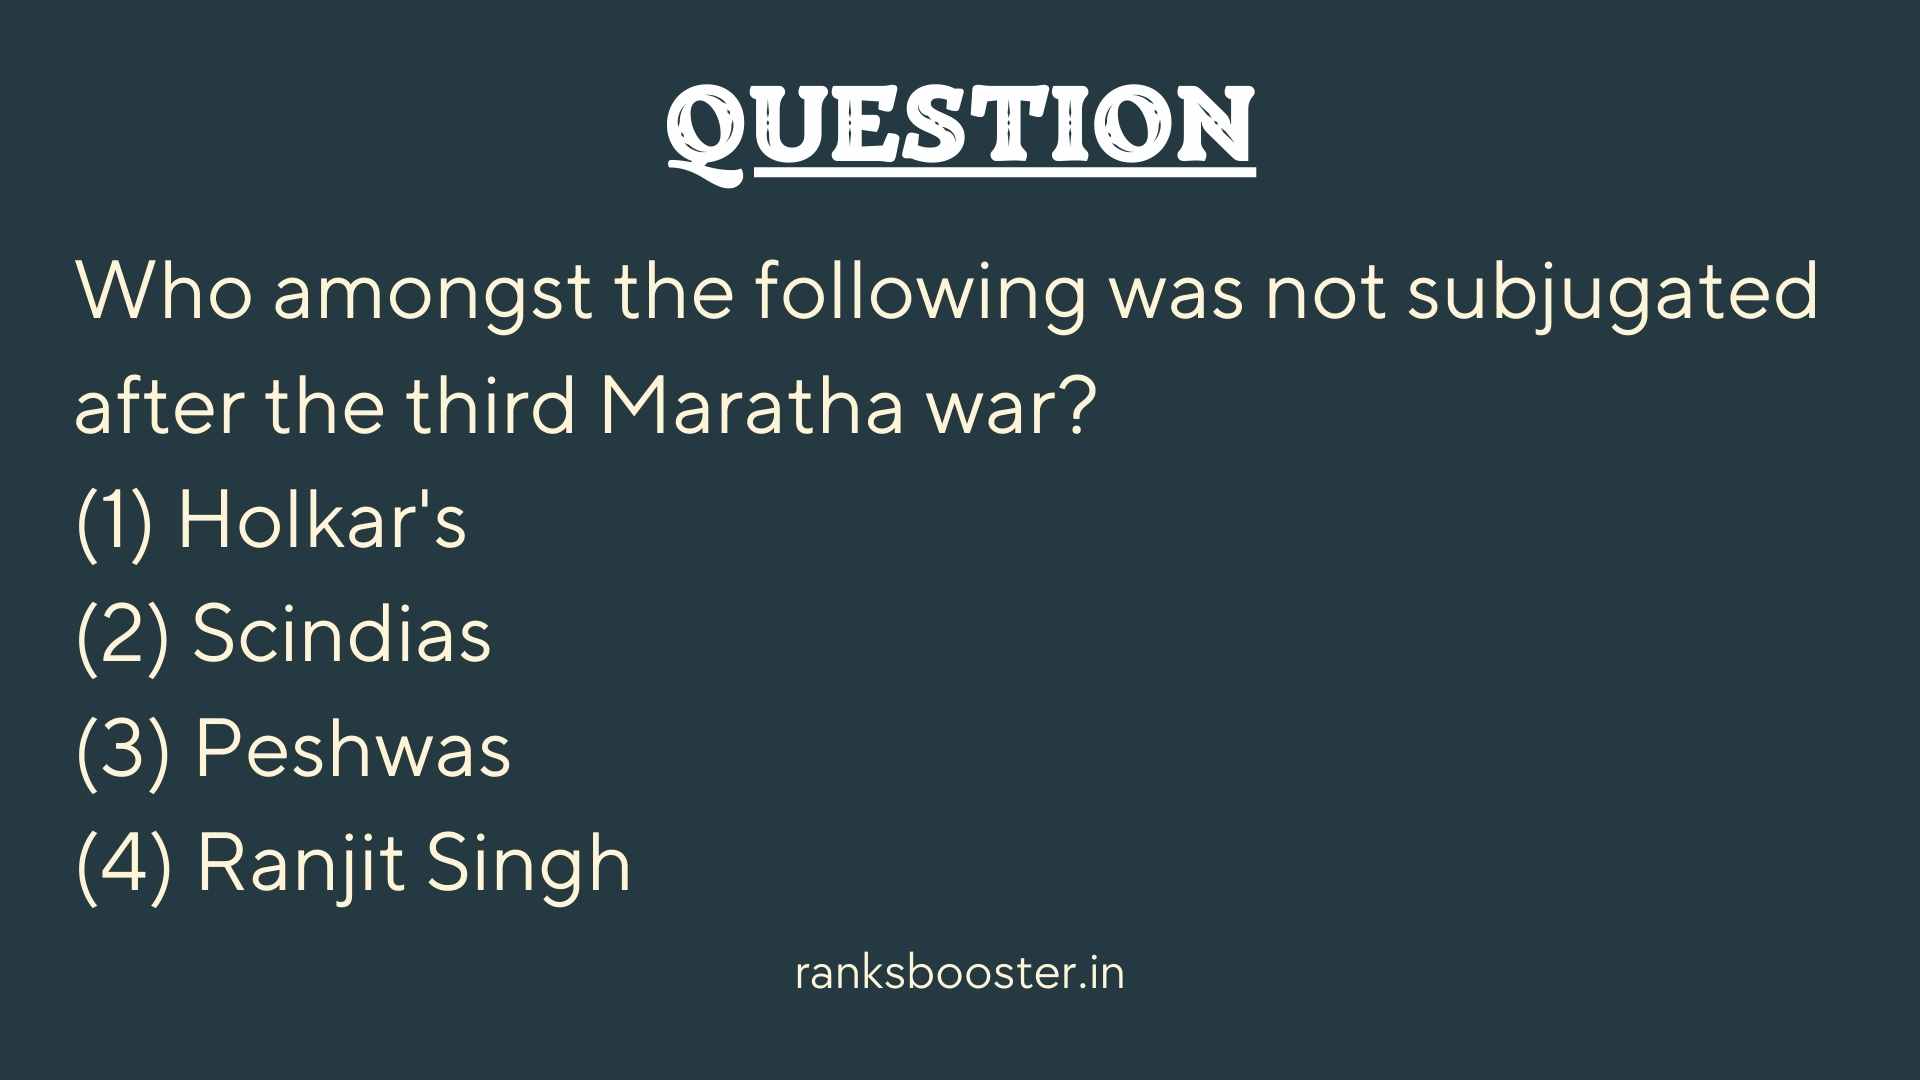 Who amongst the following was not subjugated after the third Maratha war?